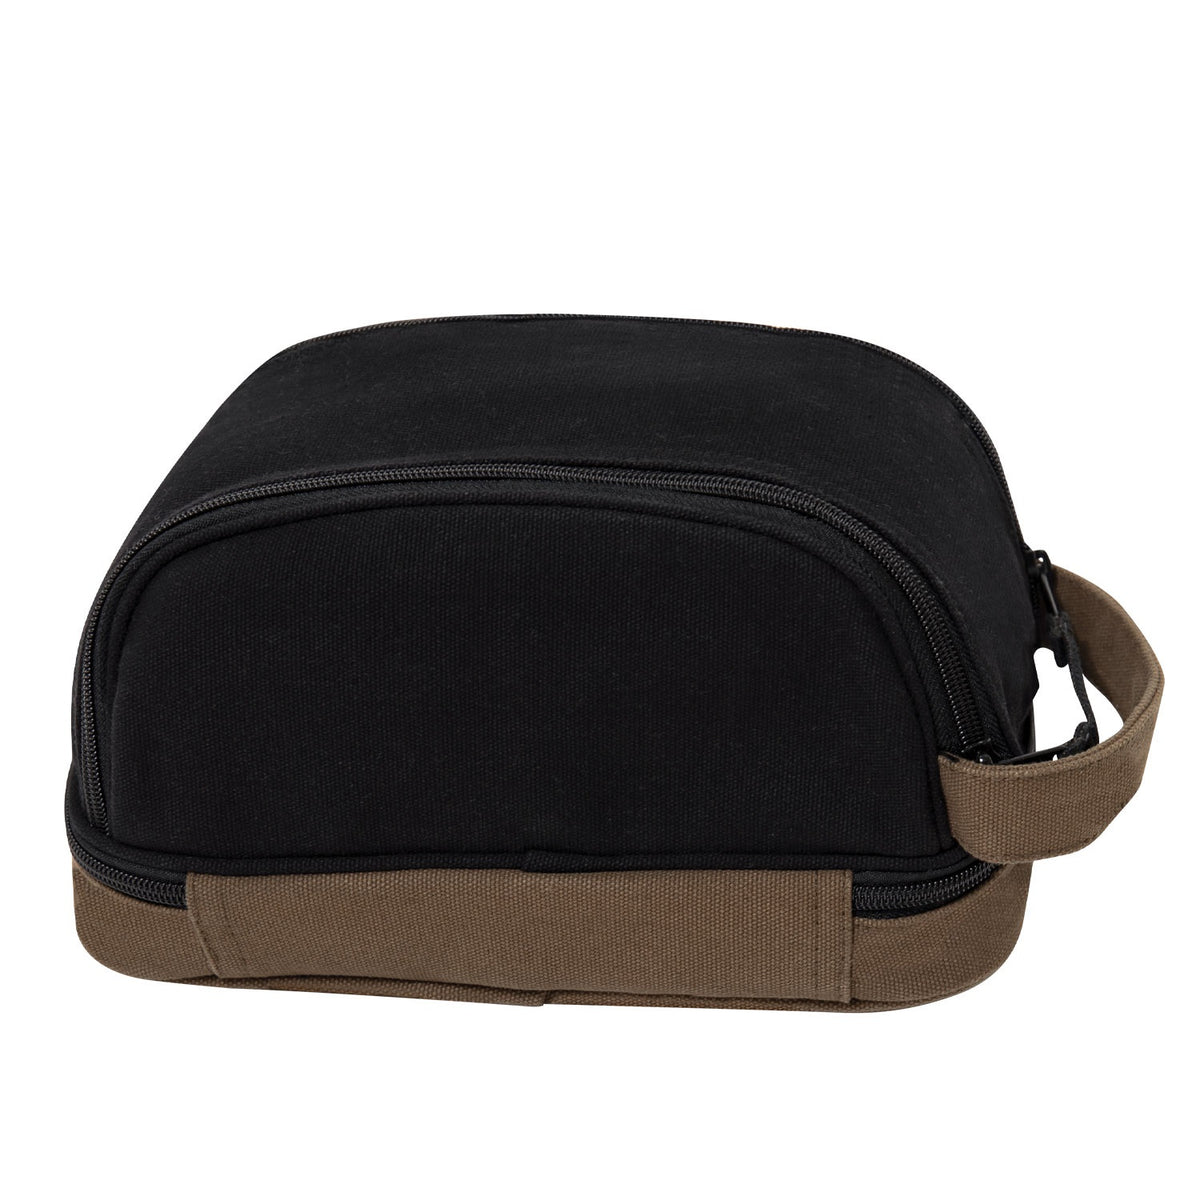 Rothco Deluxe Canvas Travel Kit Black